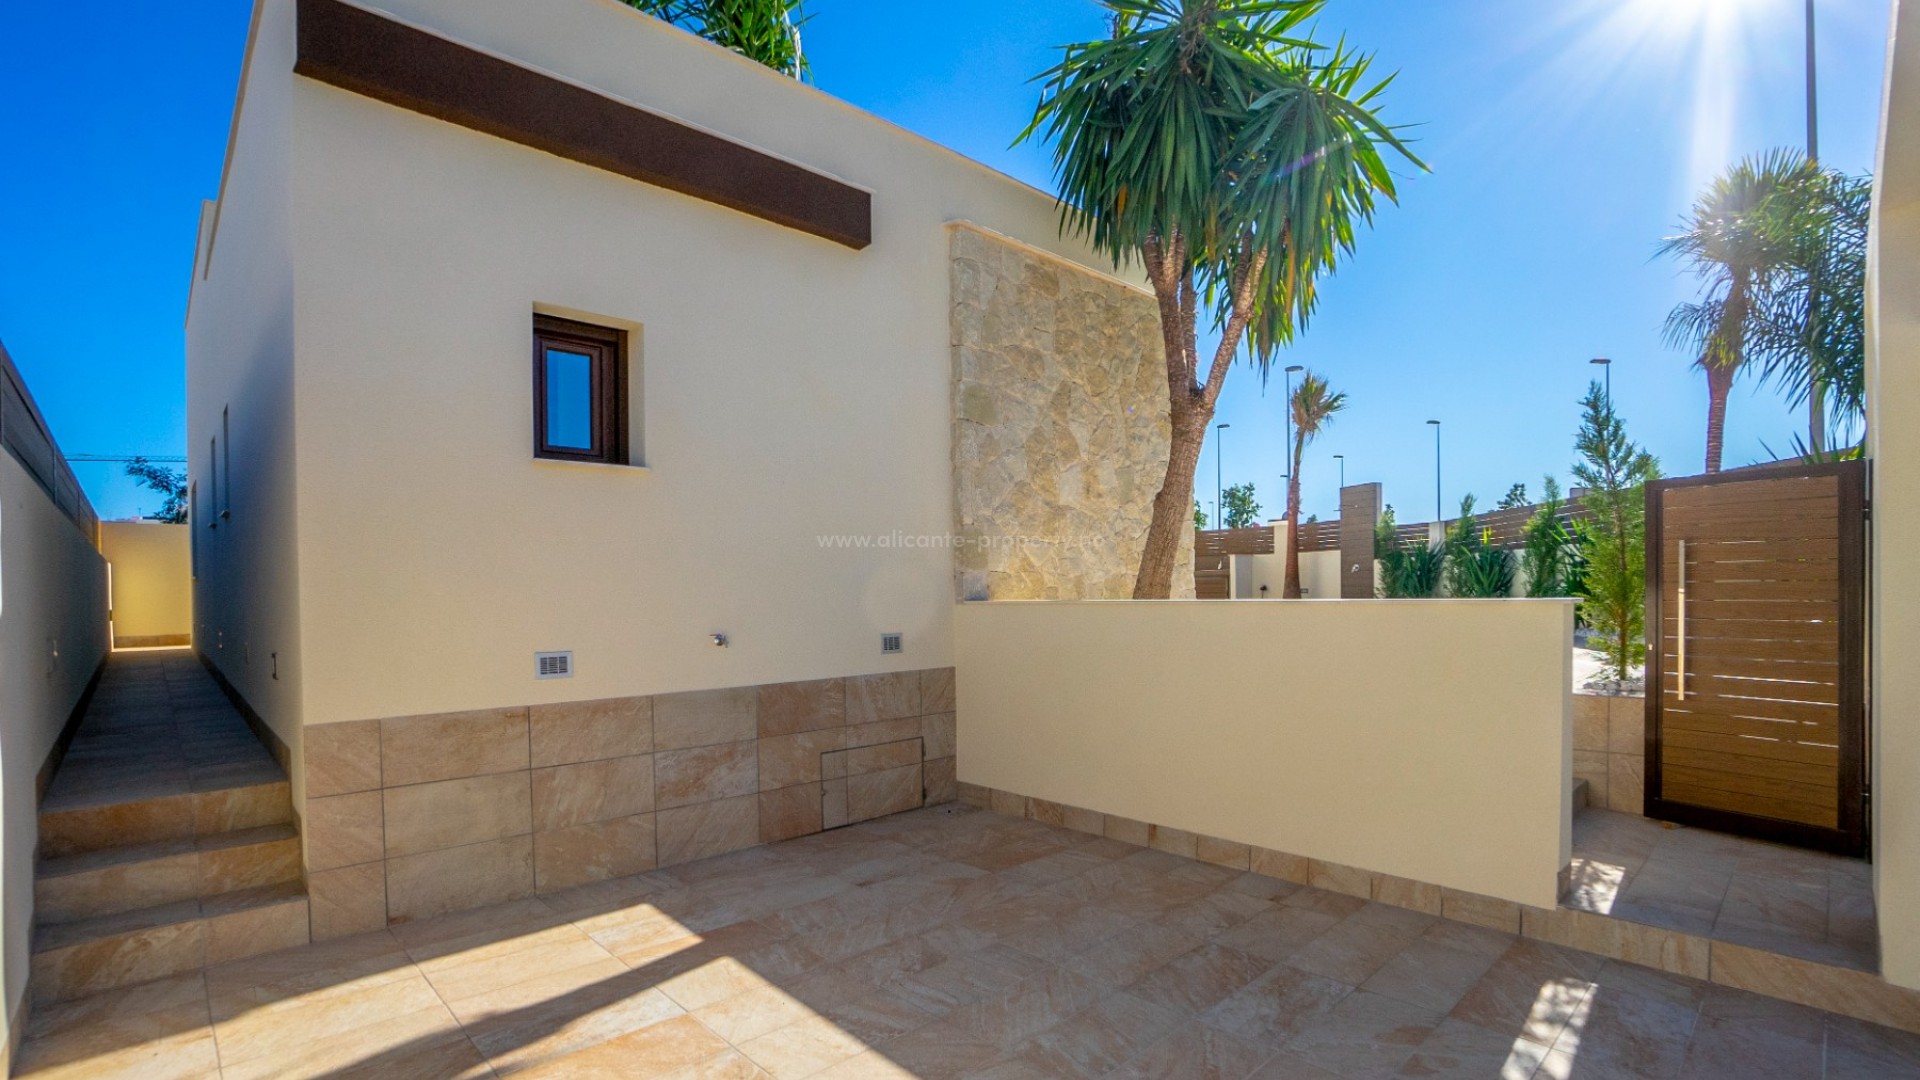 Beautiful villas/houses in Atalayas, Rojales, 3 double bedrooms and 3 bathrooms, beautiful private pool. The houses have an optional solarium and an optional basement.